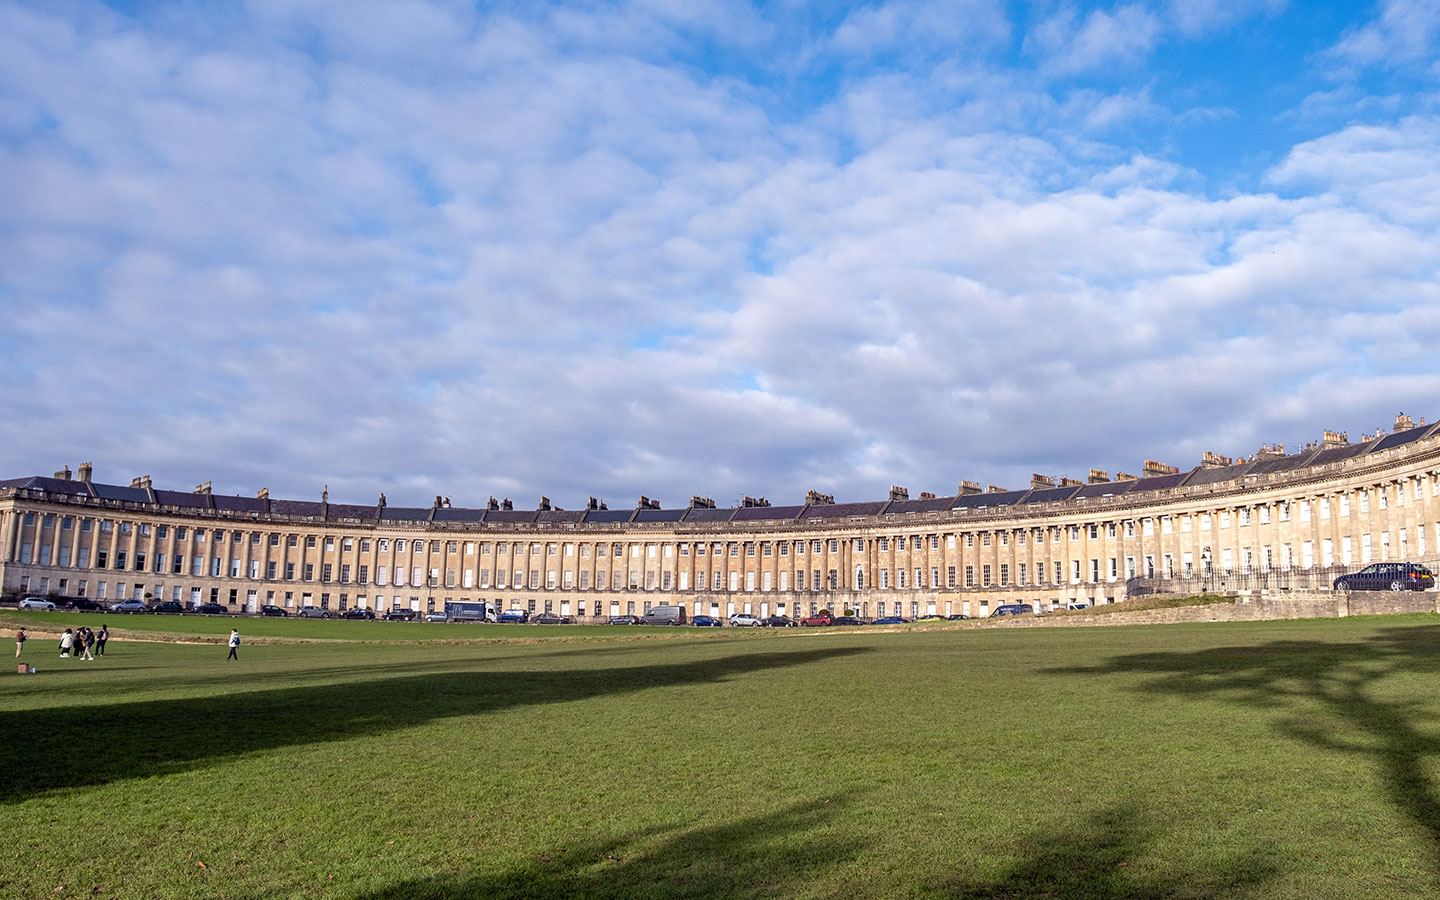 The Royal Crescent on a self-guided walking tour of Bath